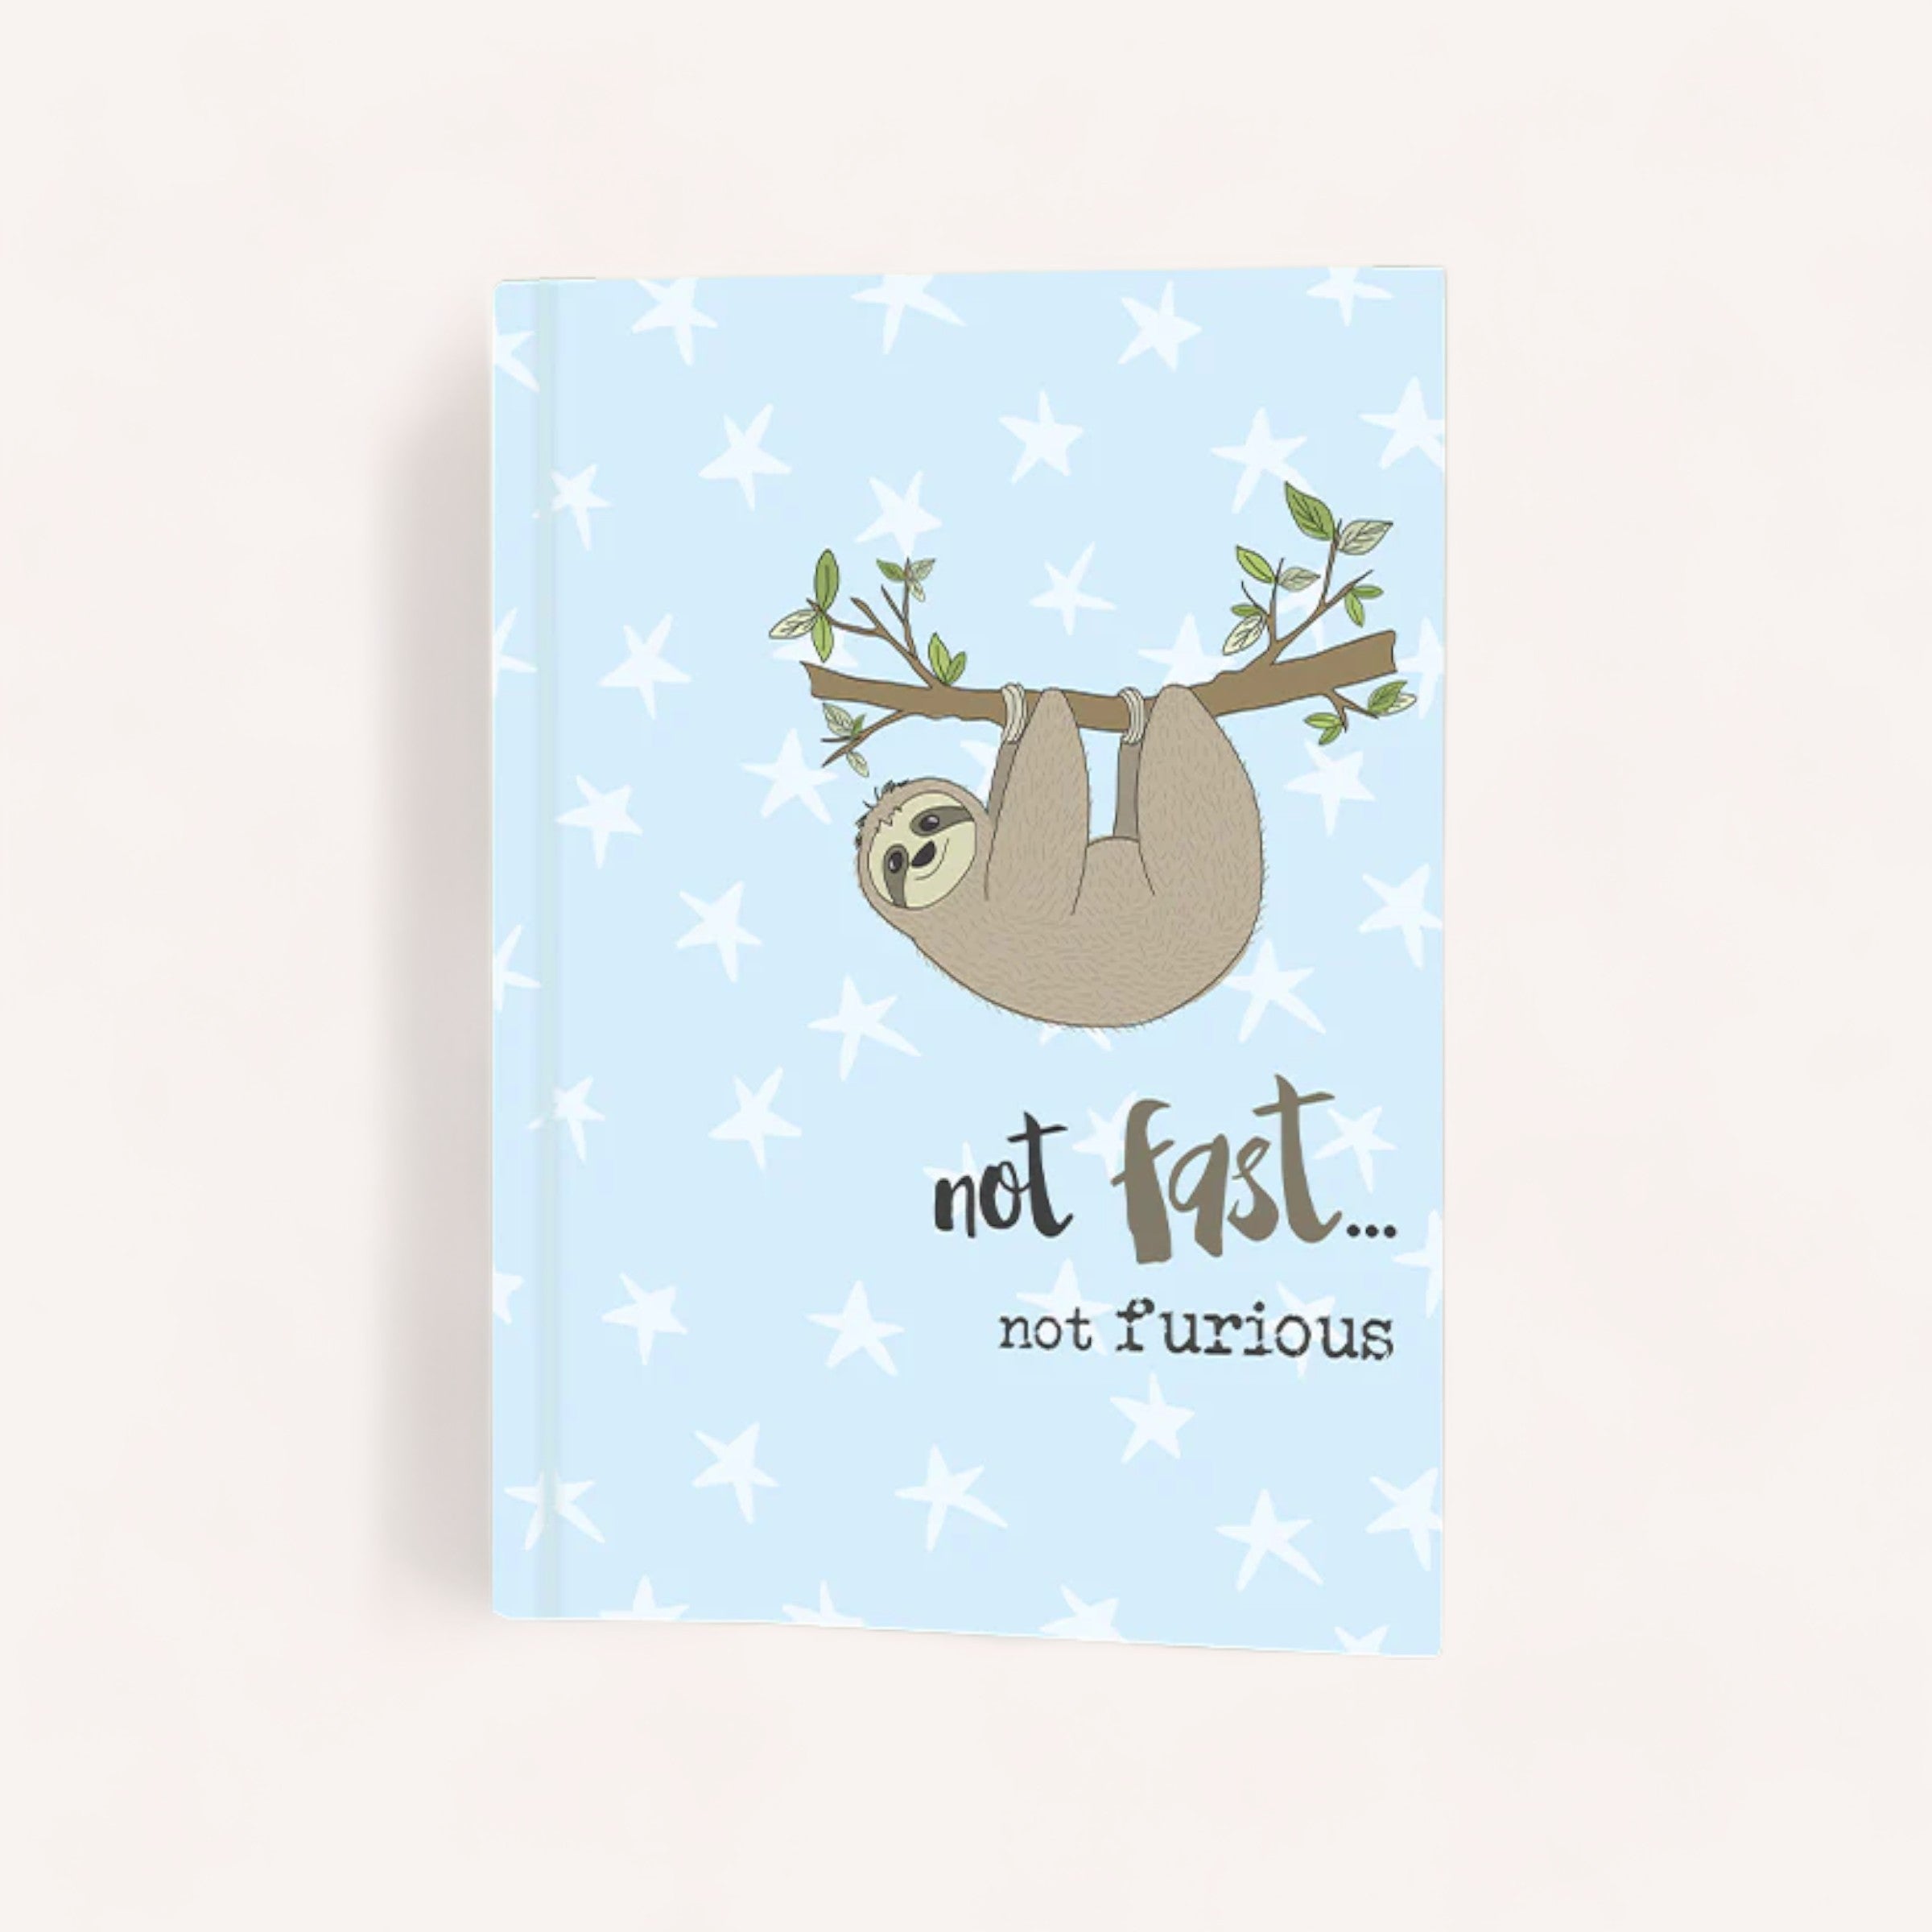 A serene blue Dandelion Not fast, Not furious Notepad featuring a cute illustration of a sloth hanging from a branch with the playful words "not fast... not furious" below it, surrounded by a pattern of stars.